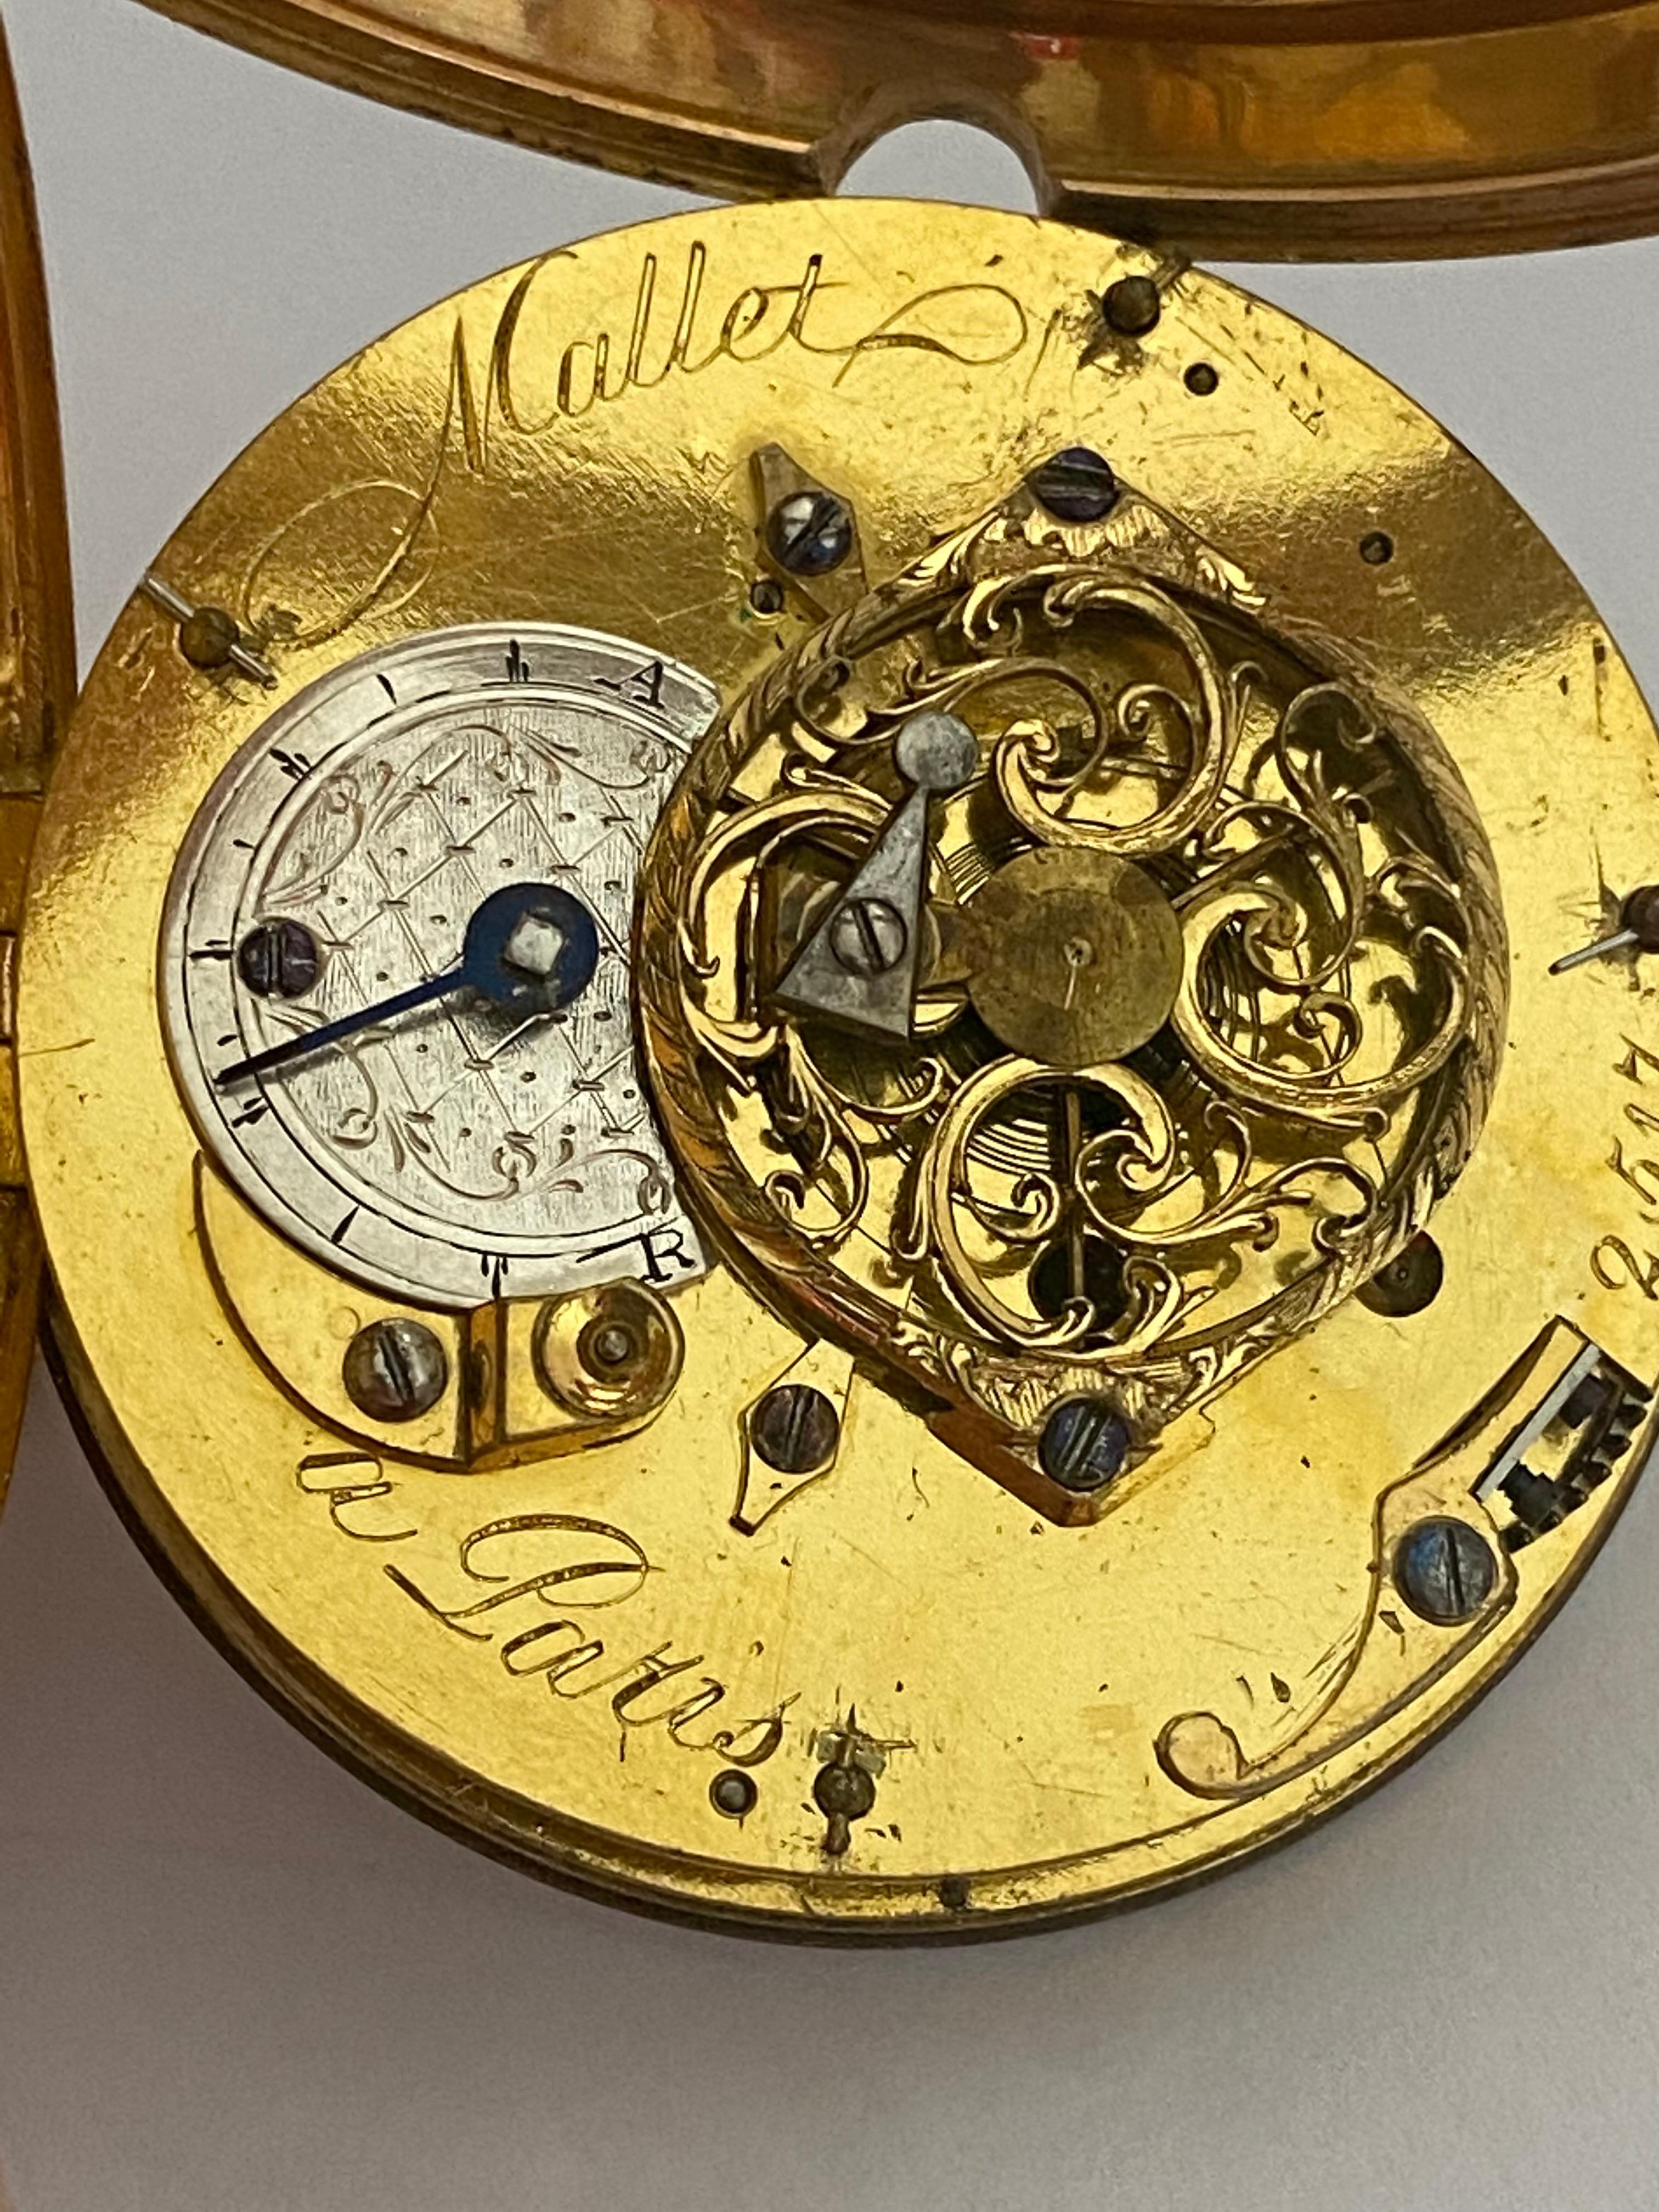 Rare & Early Verge Fusee 18 Karat Tri-Color Gold Pocket Watch by Mallet a Paris For Sale 4